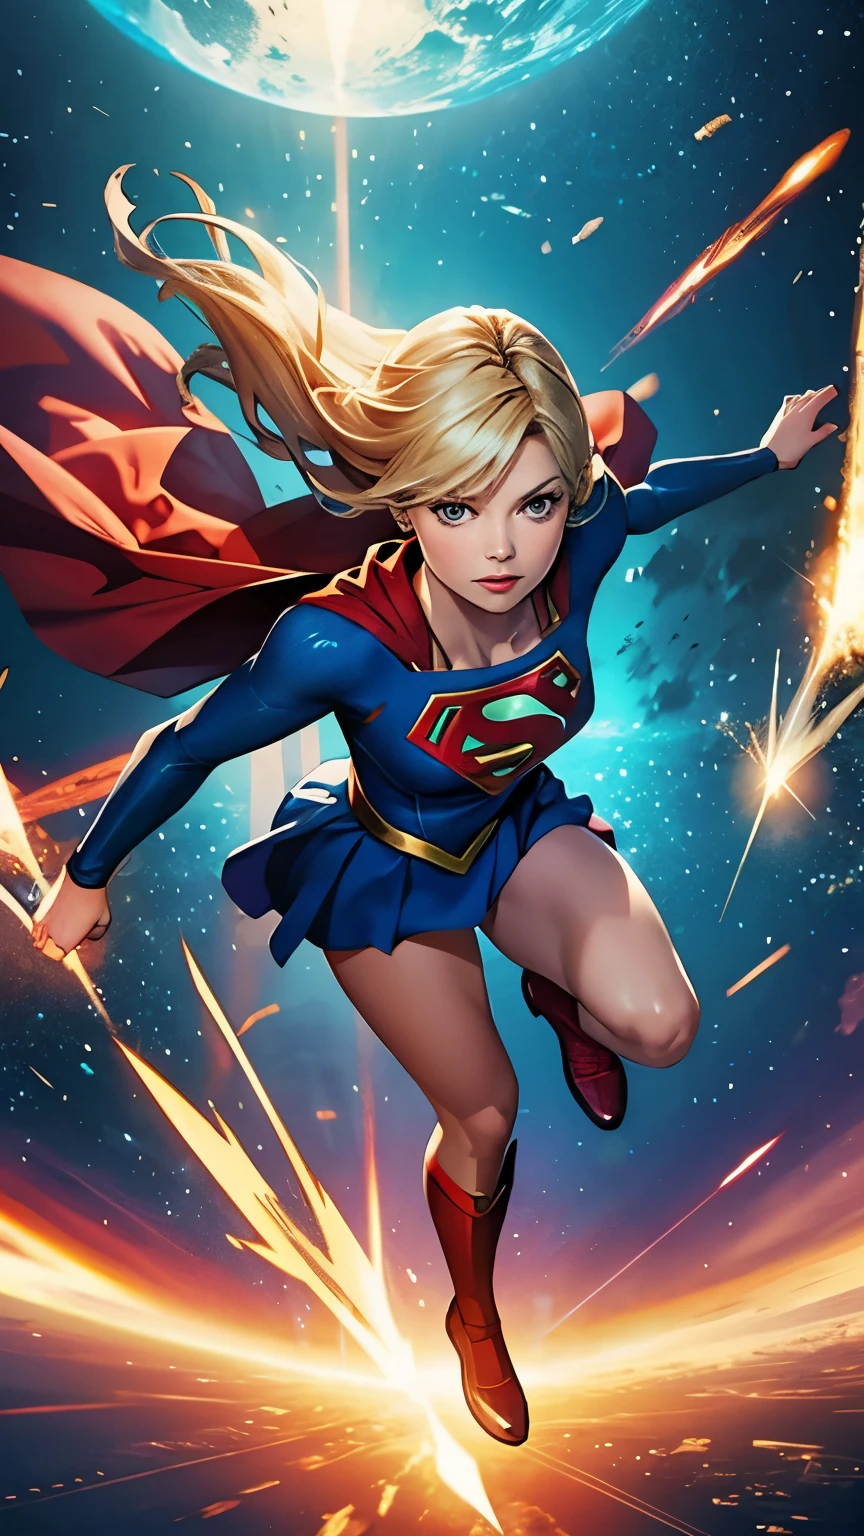 Supergirl flying through time and space